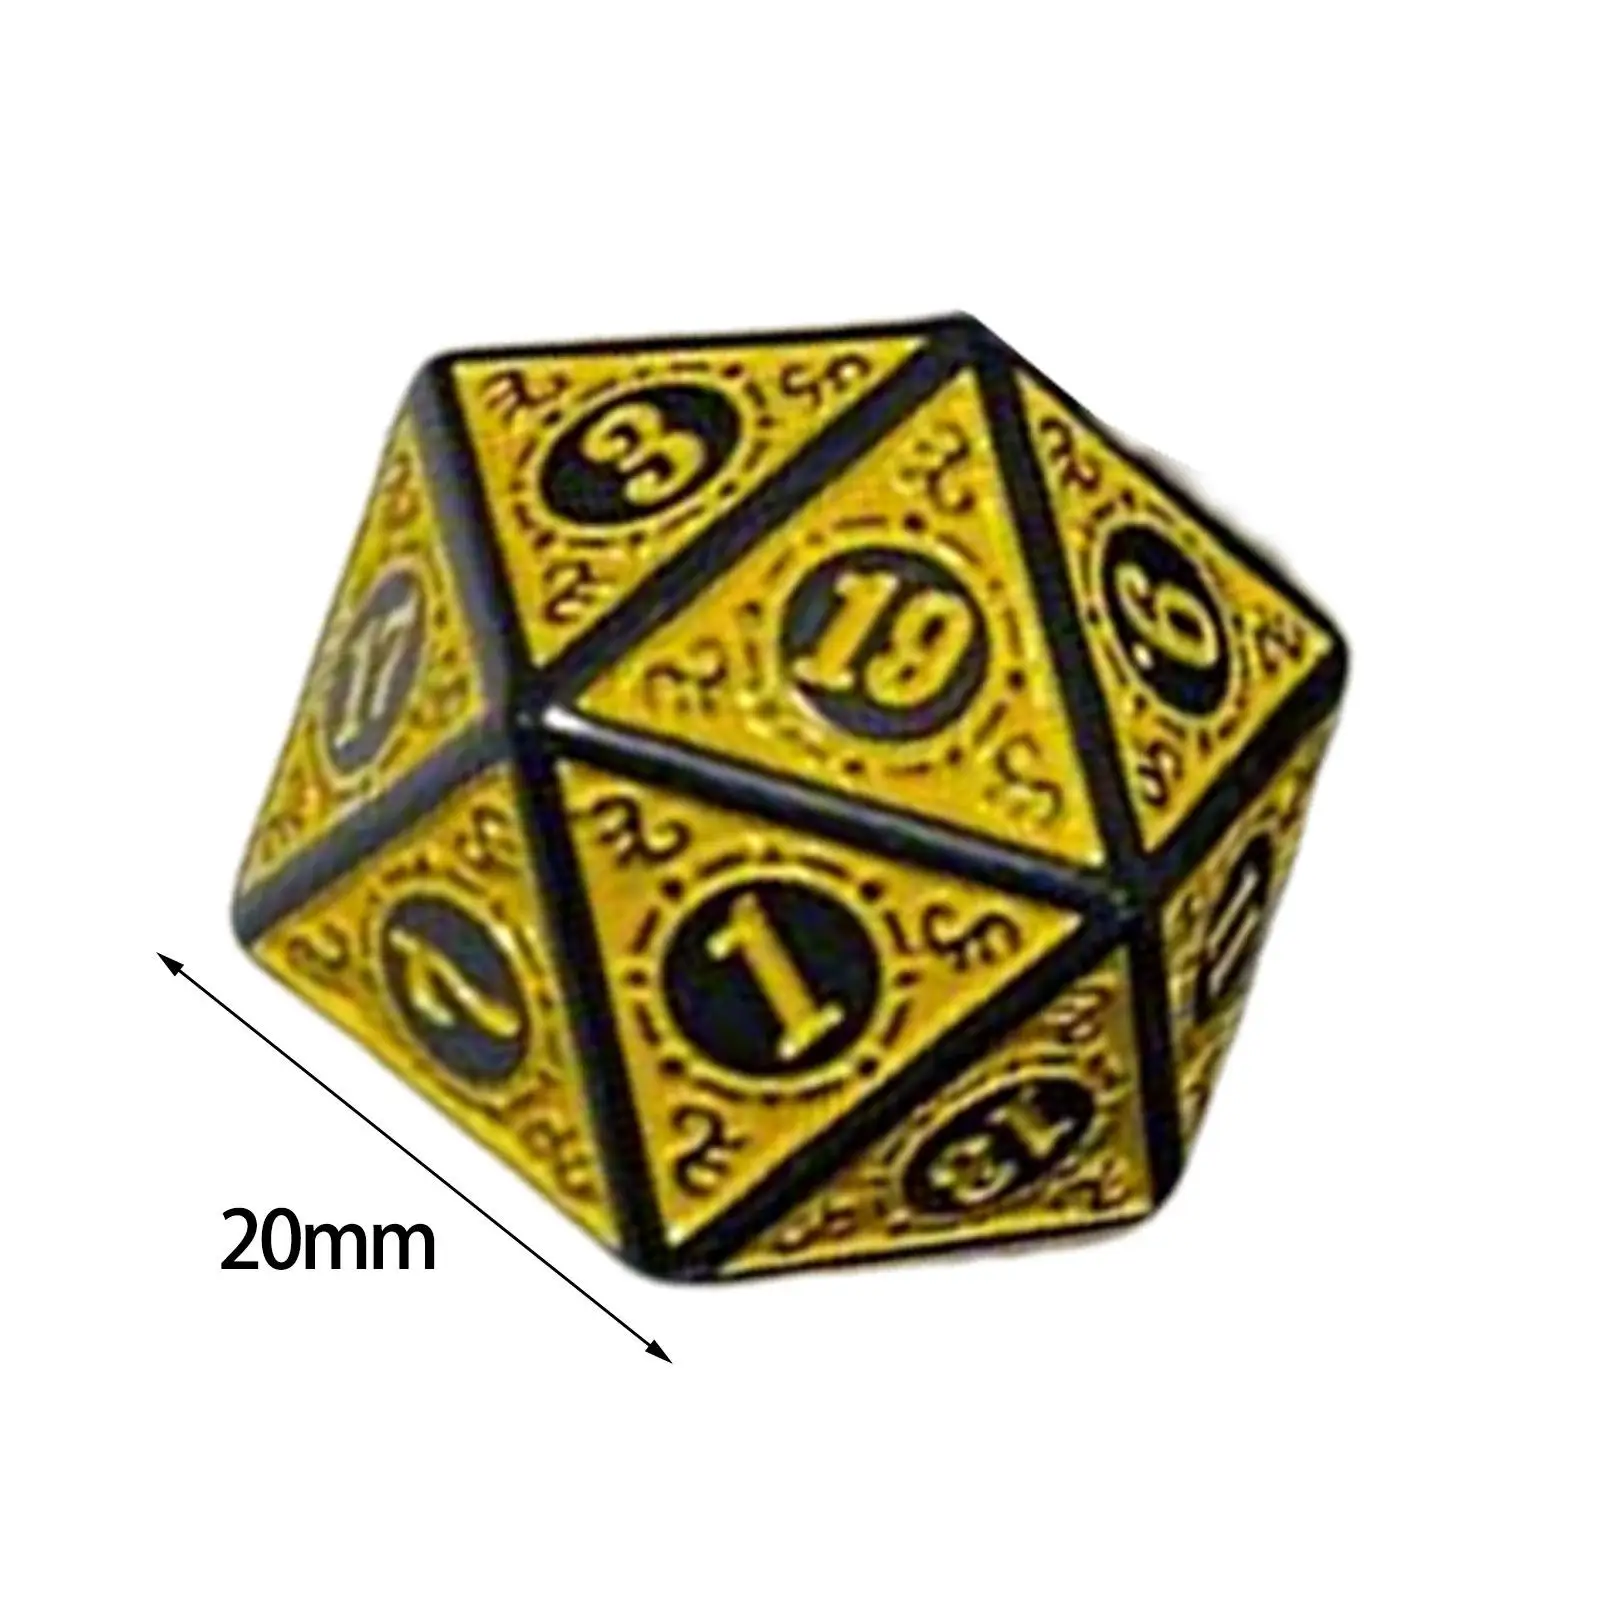 20 Pieces Polyhedron Dices Party Supplies Role Playing Game Dices D20 Dices Set for Bar KTV Party Card Game Table Game